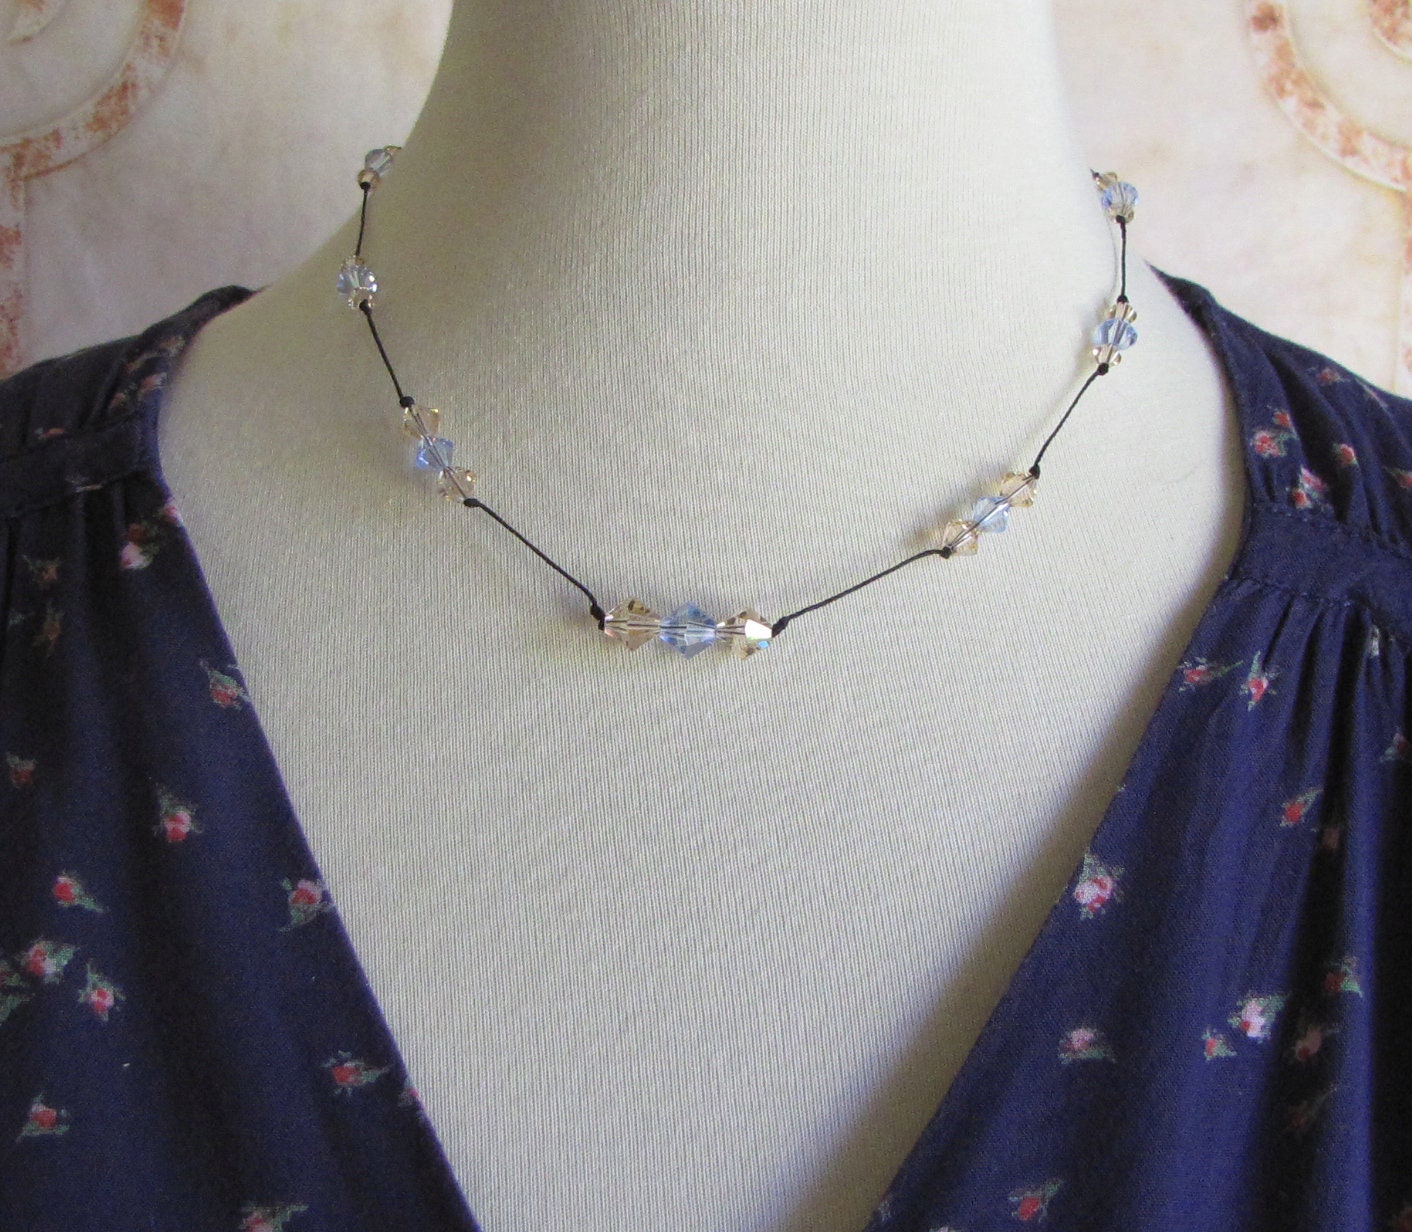 tin cup crystal necklace on nylon